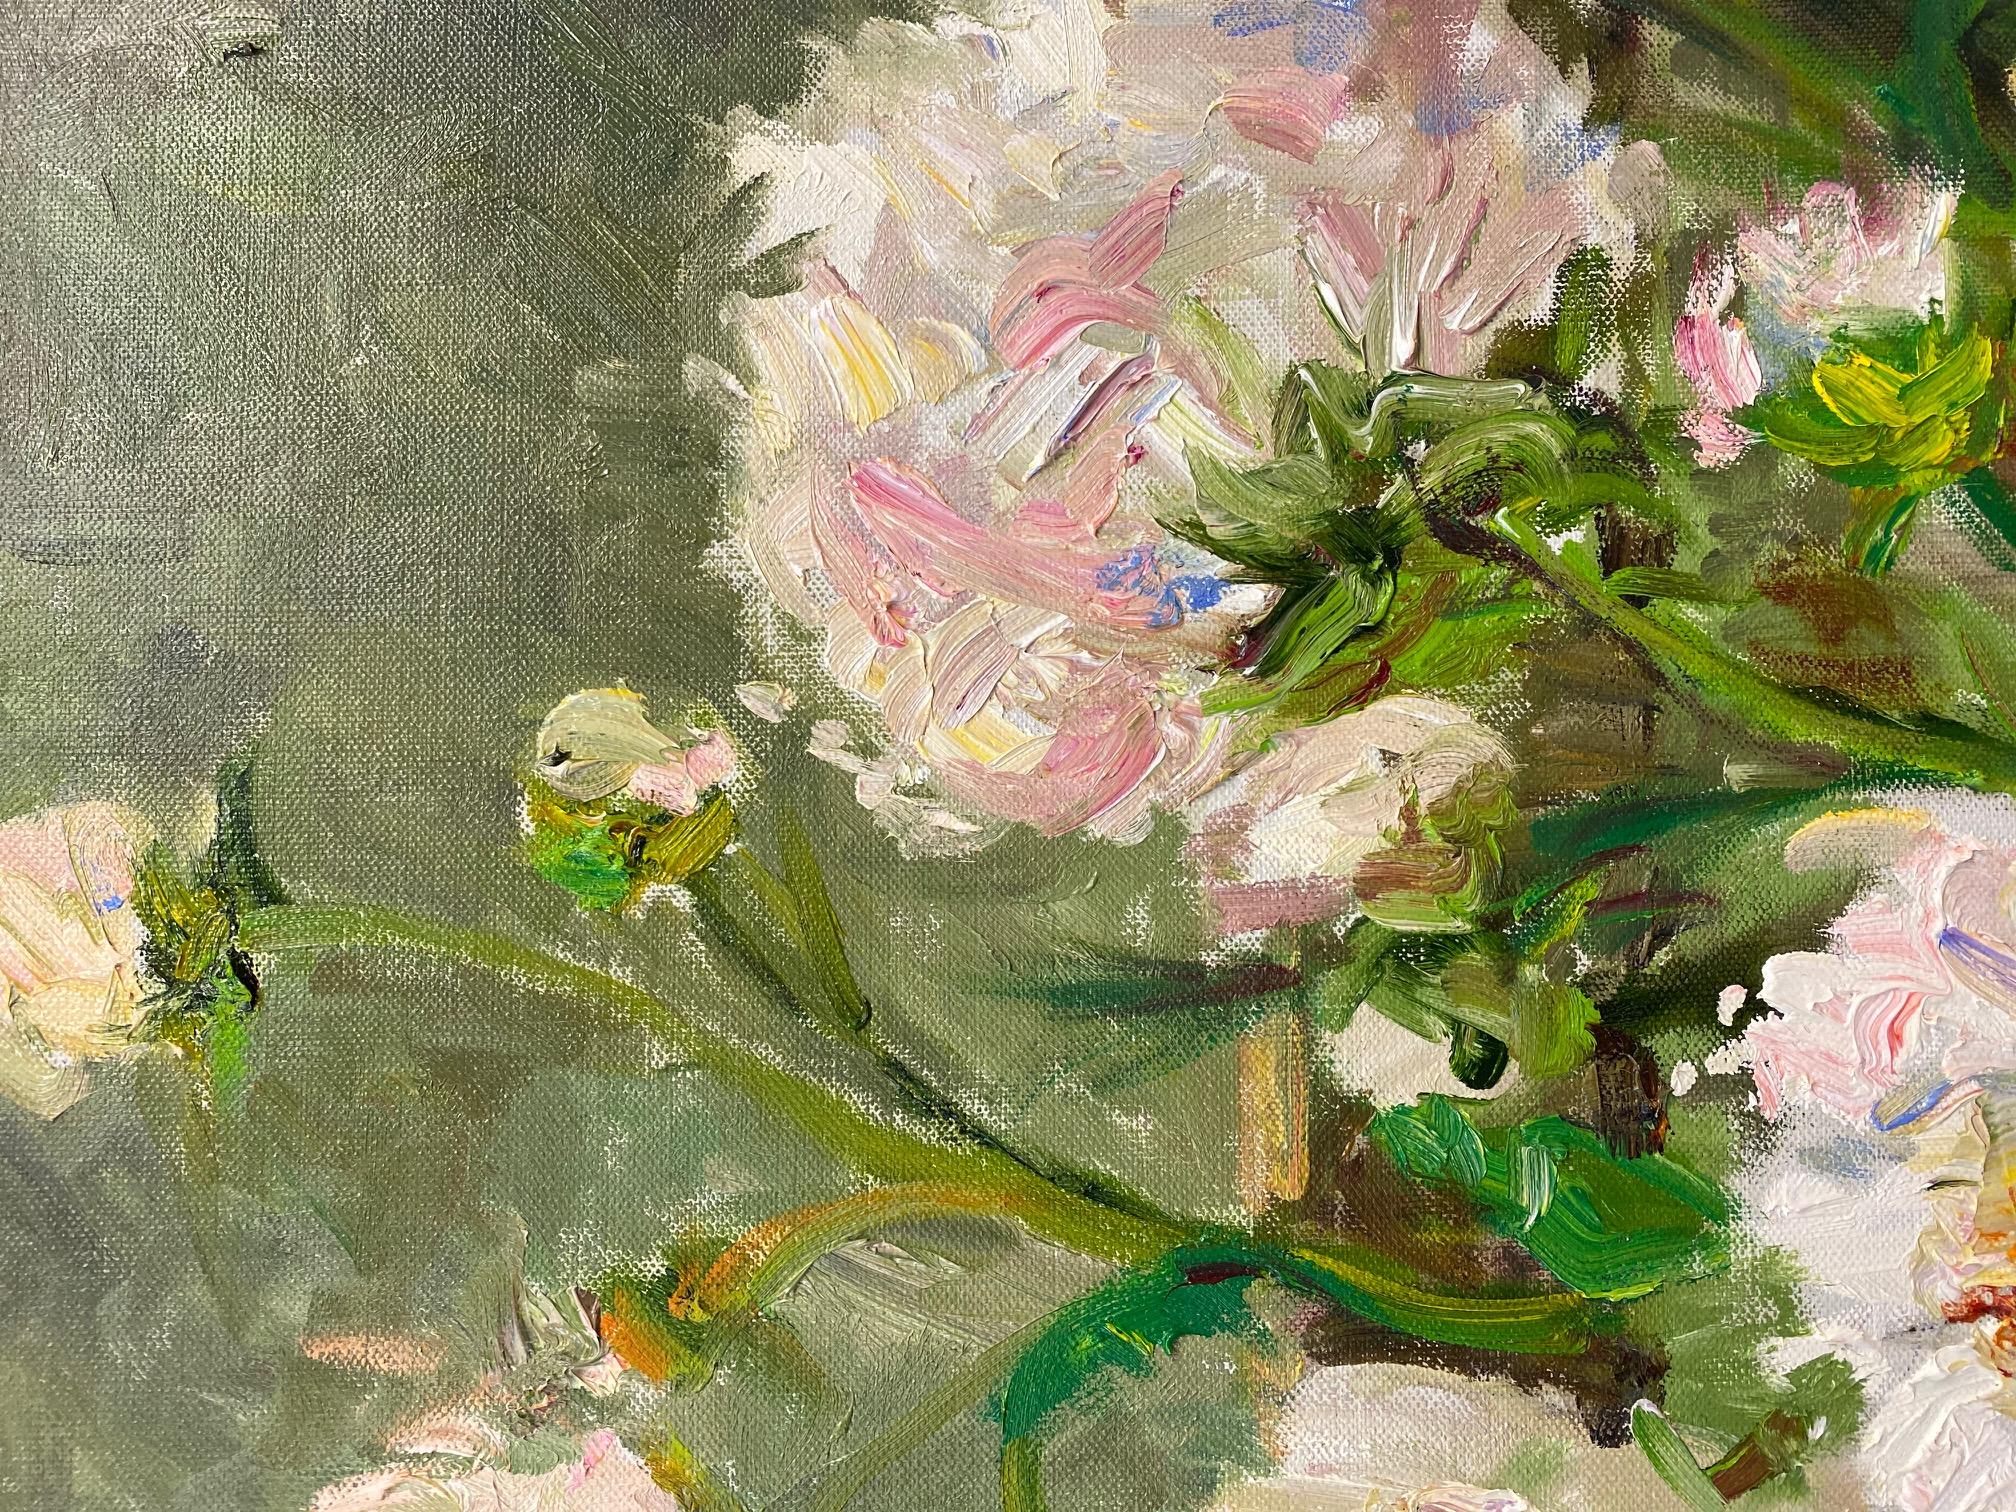 The ever popular peonies are in bloom beyond the gate, lending beauty and fragrance to all lucky enough to pass by.  In this contemporary impressionist landscape artist Doreen Tighe zooms into the structure of the peonies and effectively uses